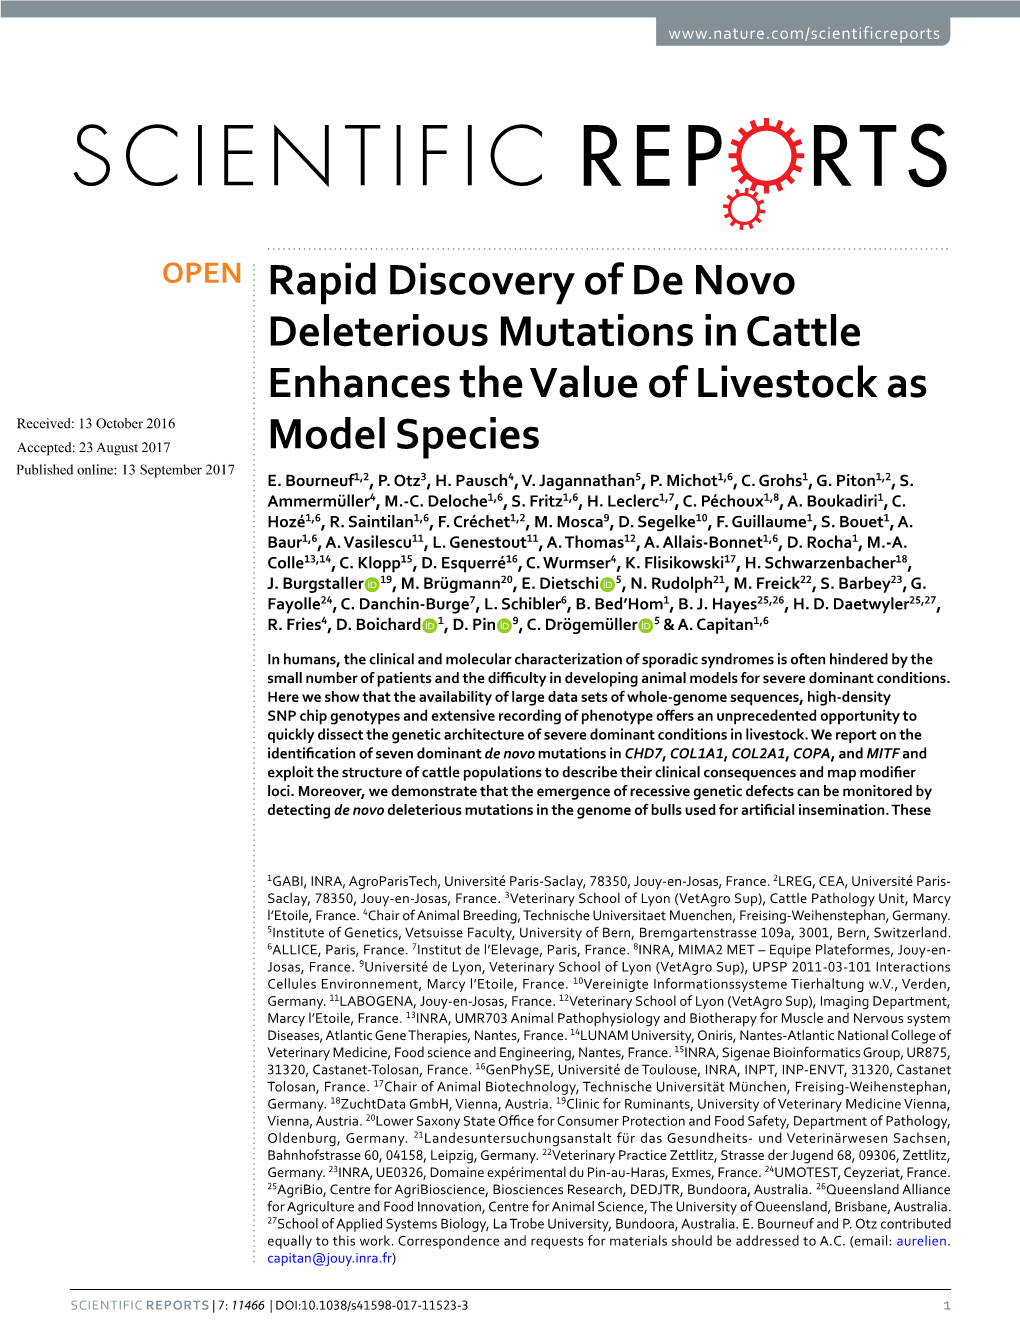 Rapid Discovery of De Novo Deleterious Mutations In